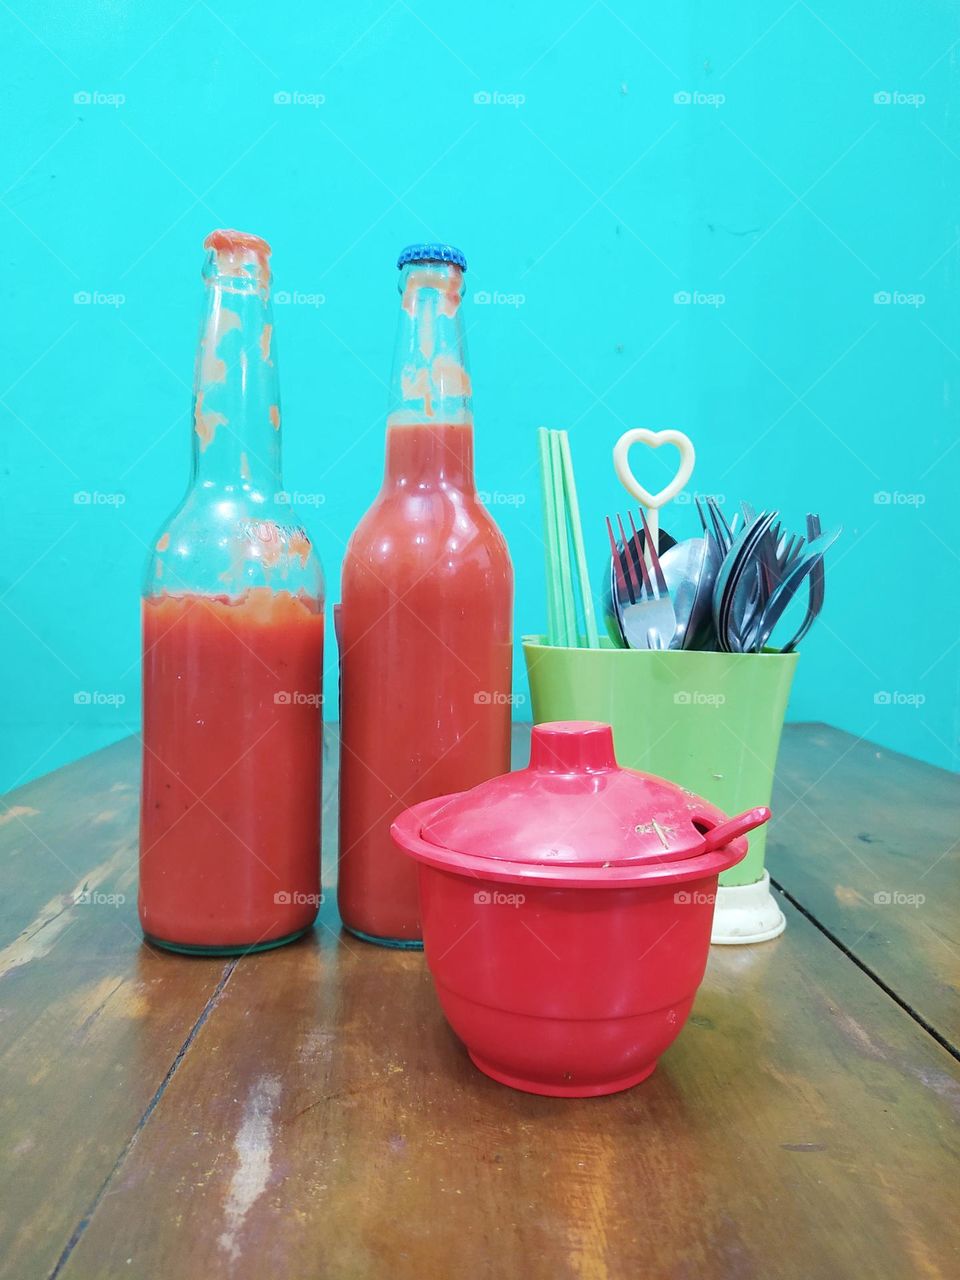 View of the dining table at a local chicken noodle shop, there are bottles of tomato sauce, chili sauce, cutlery, chopsticks on a wooden table with a Tosca wall as a background